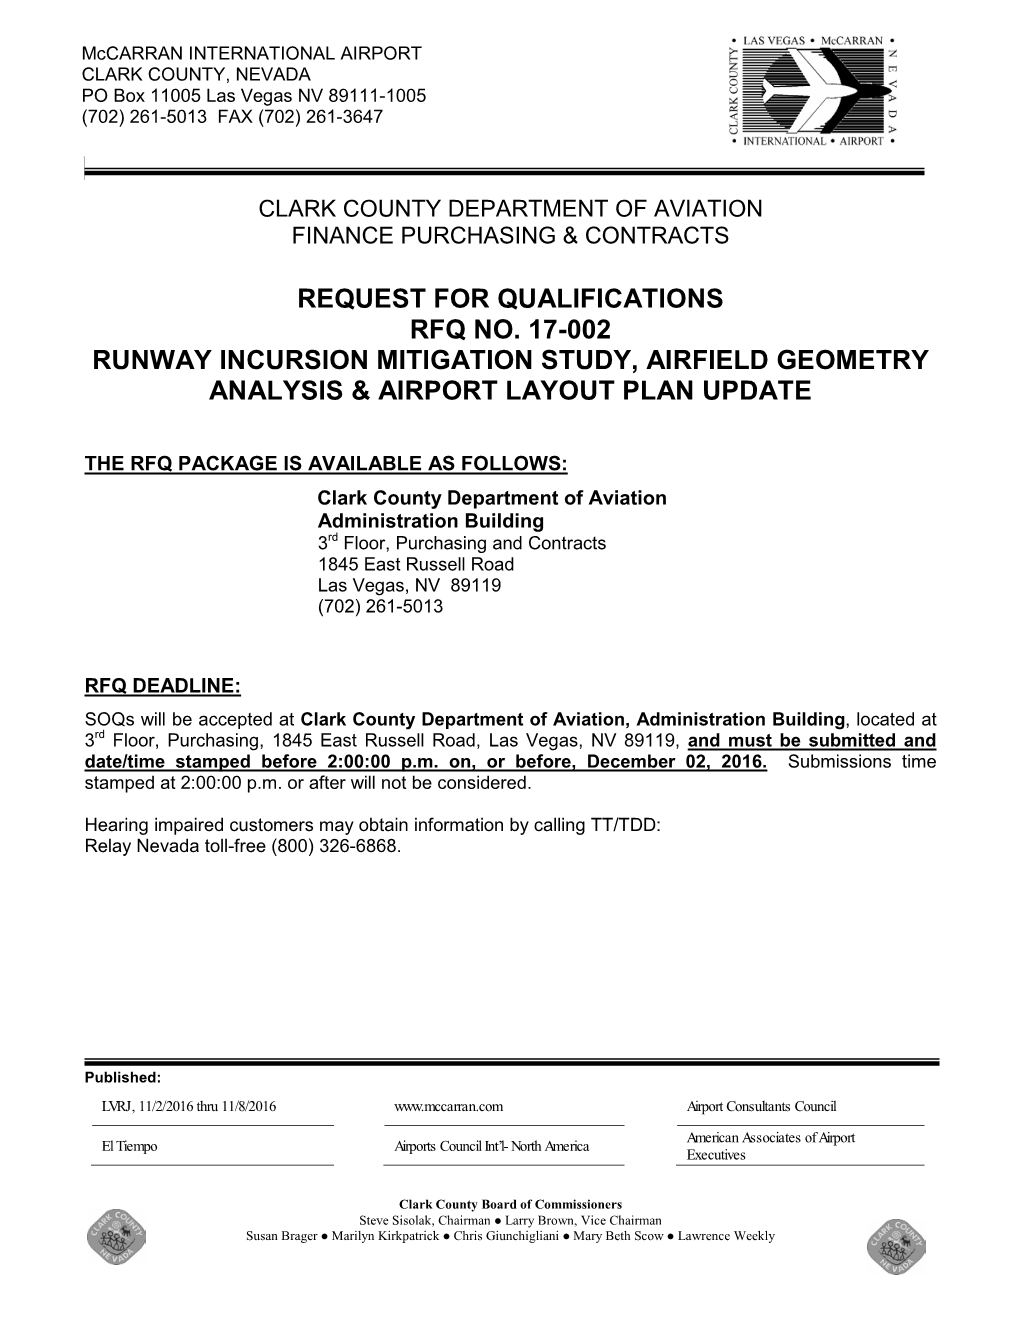 Request for Qualifications Rfq No. 17-002 Runway Incursion Mitigation Study, Airfield Geometry Analysis & Airport Layout Plan Update